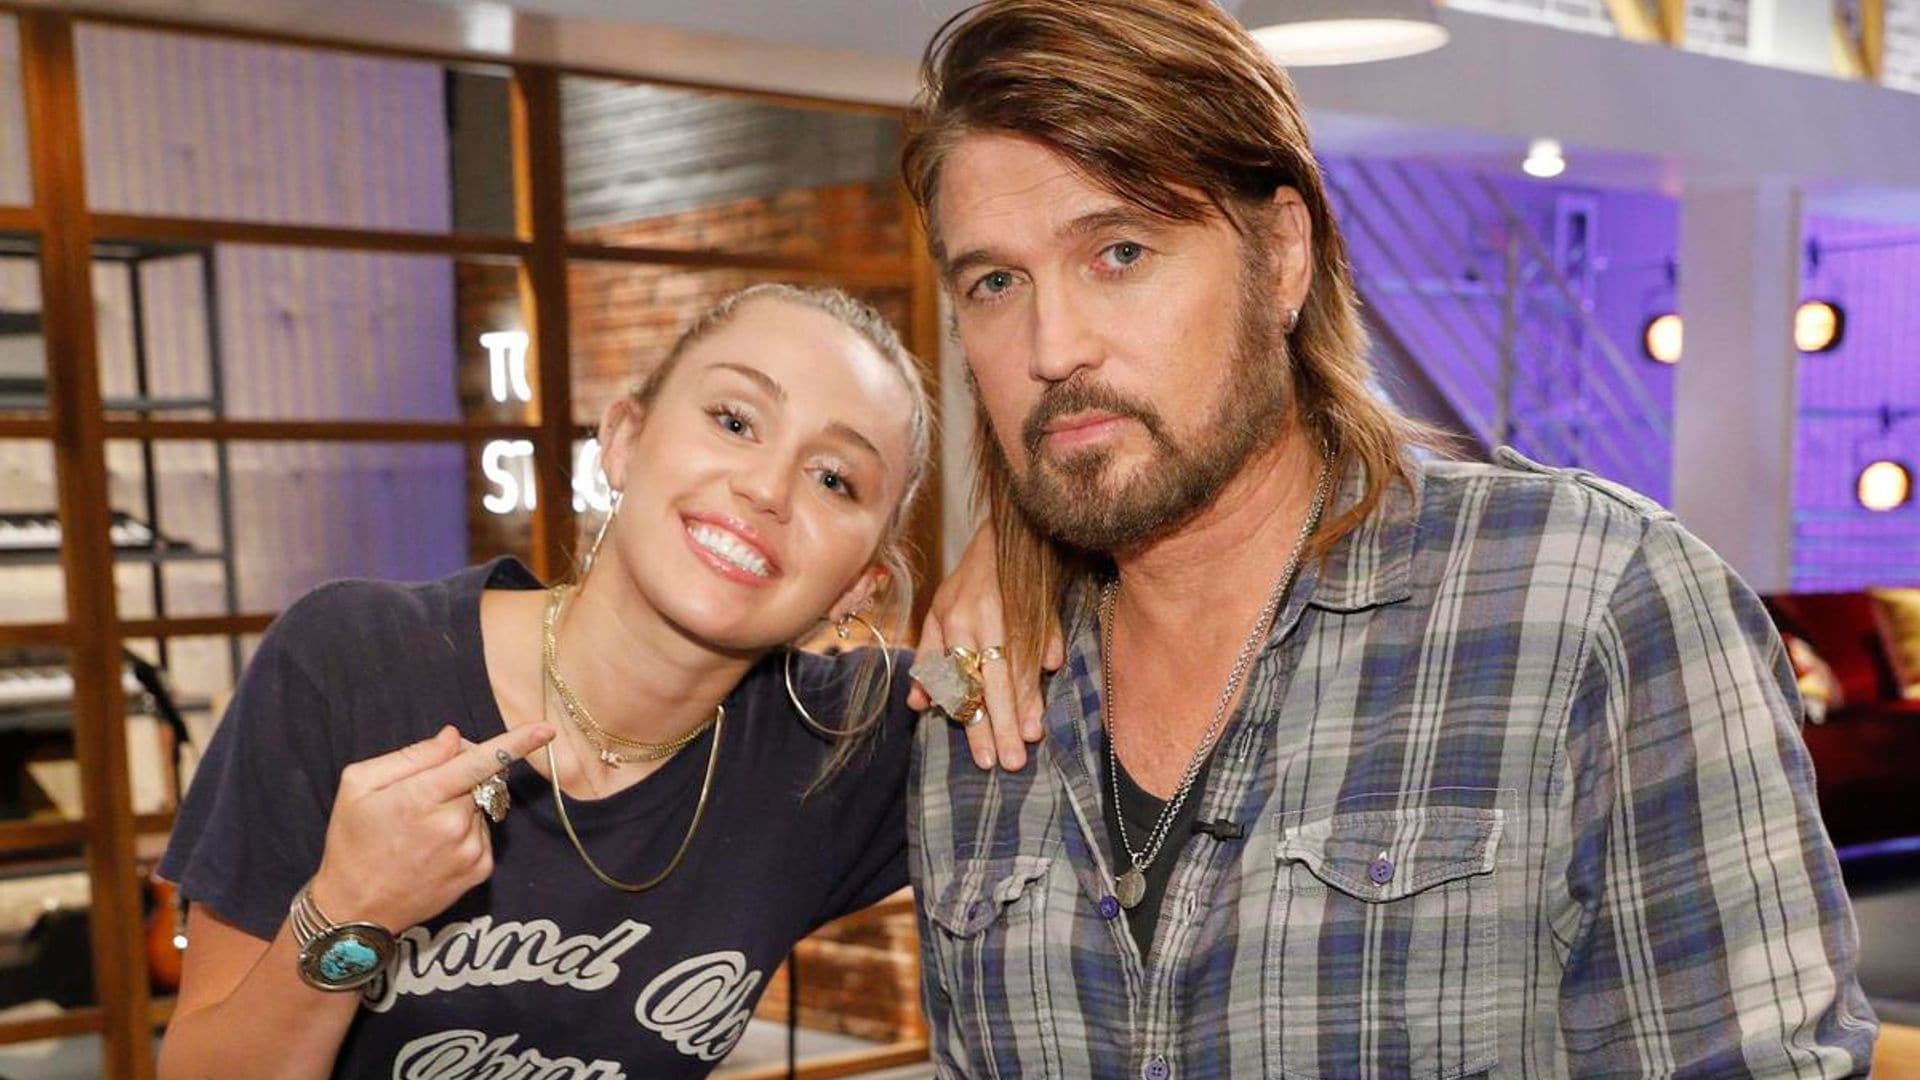 Miley Cyrus’ dad Billy Ray Cyrus shares sweet message amid family feud